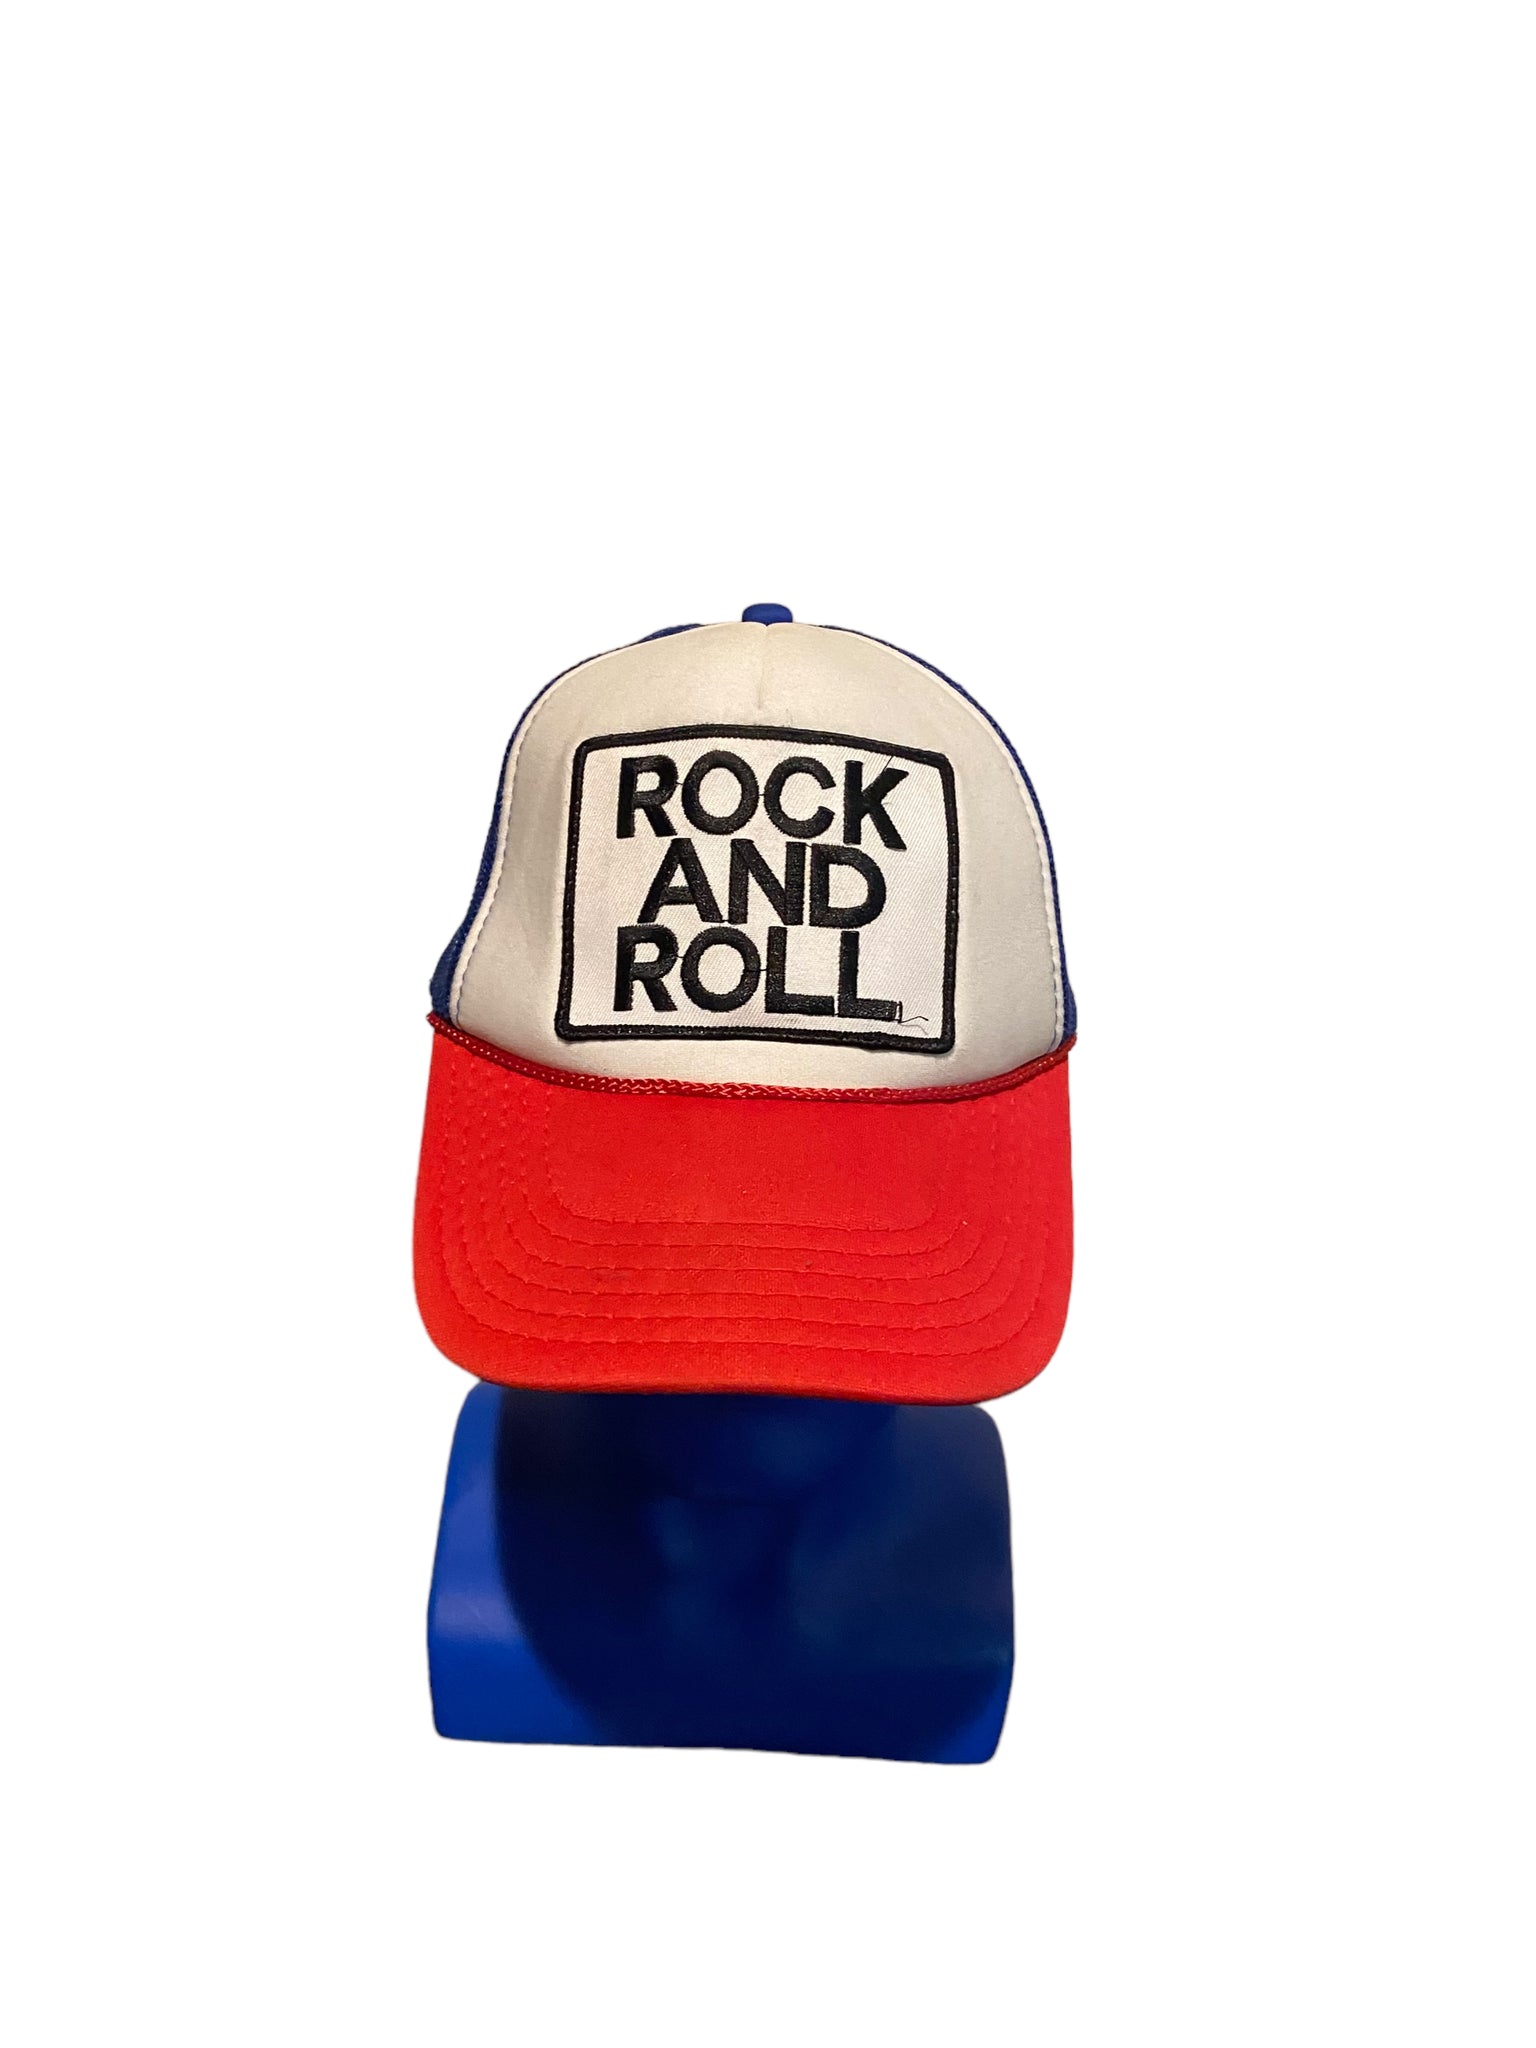 aviator nation rock and roll patch red white blue truck hat snapback